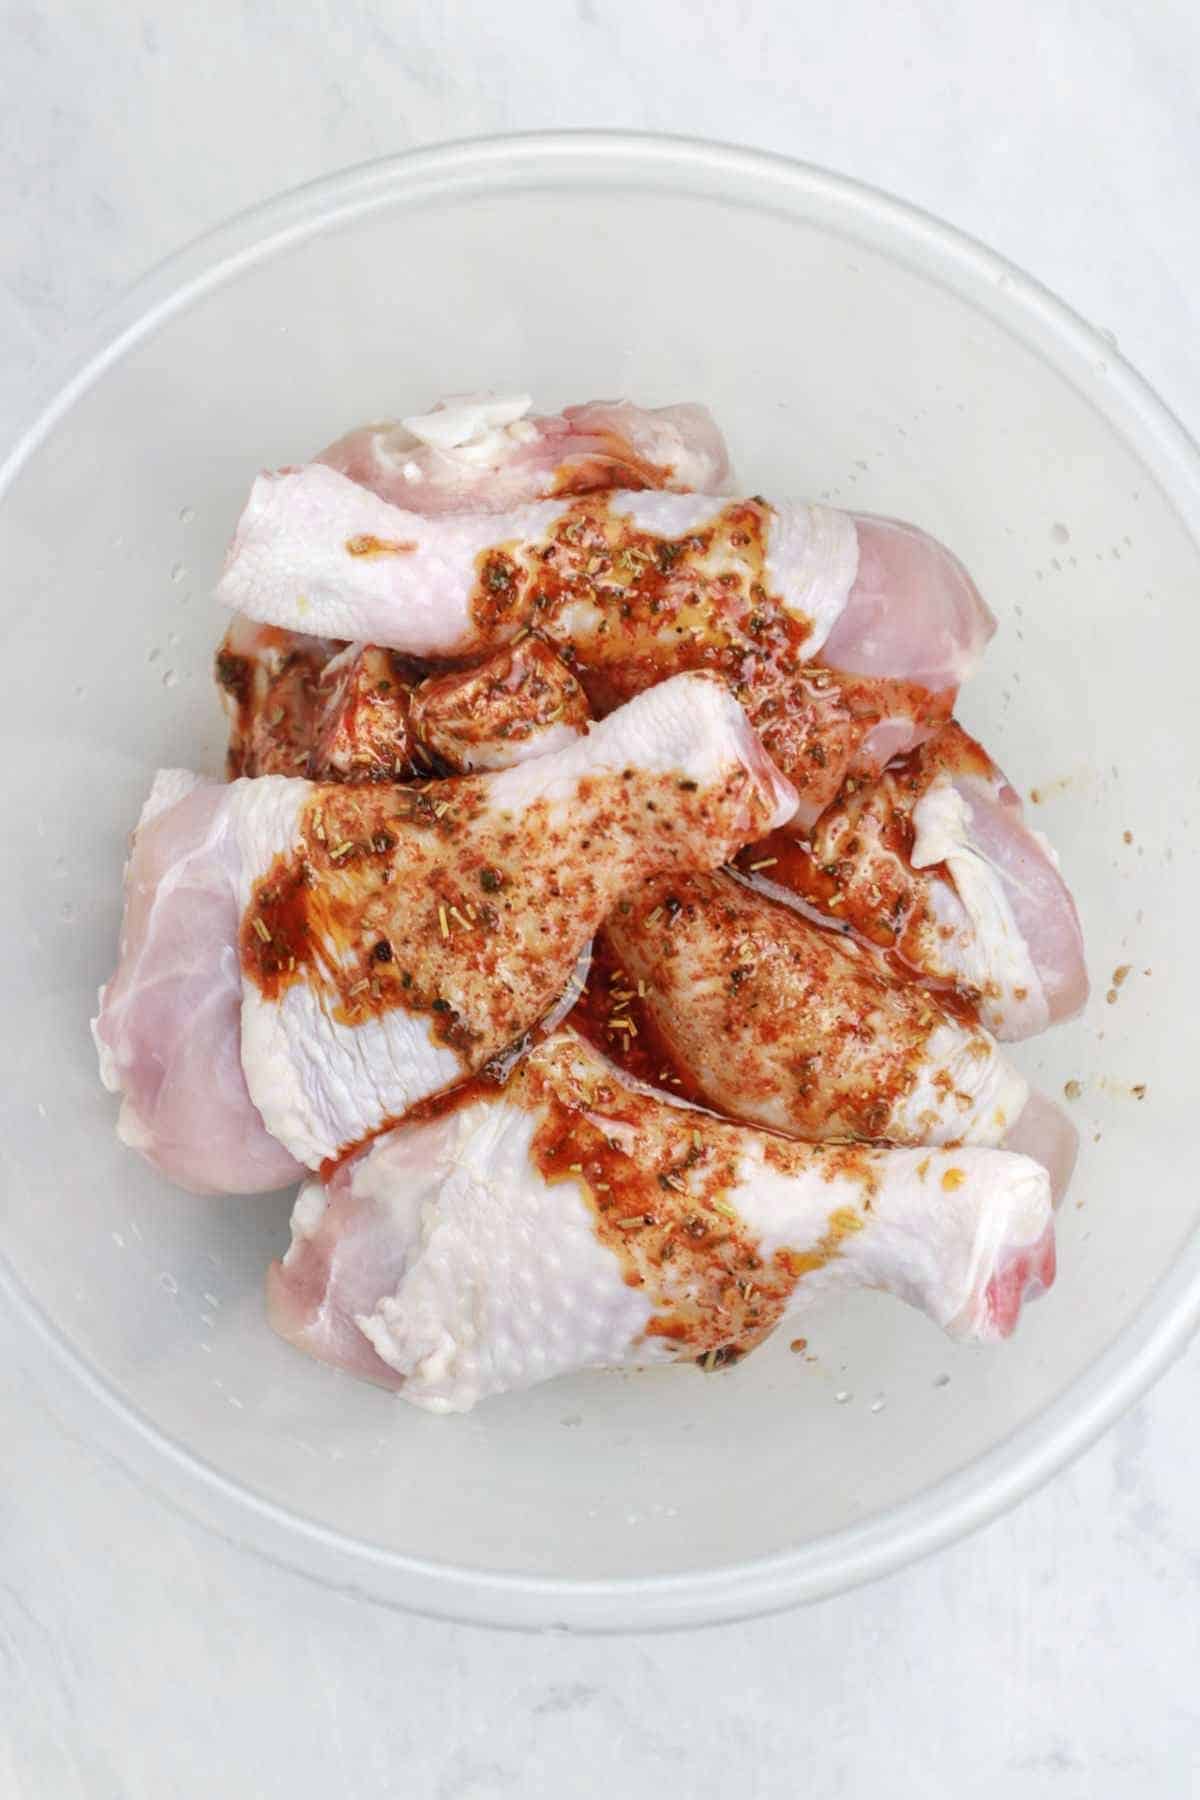 marinade added to drumsticks in a bowl.